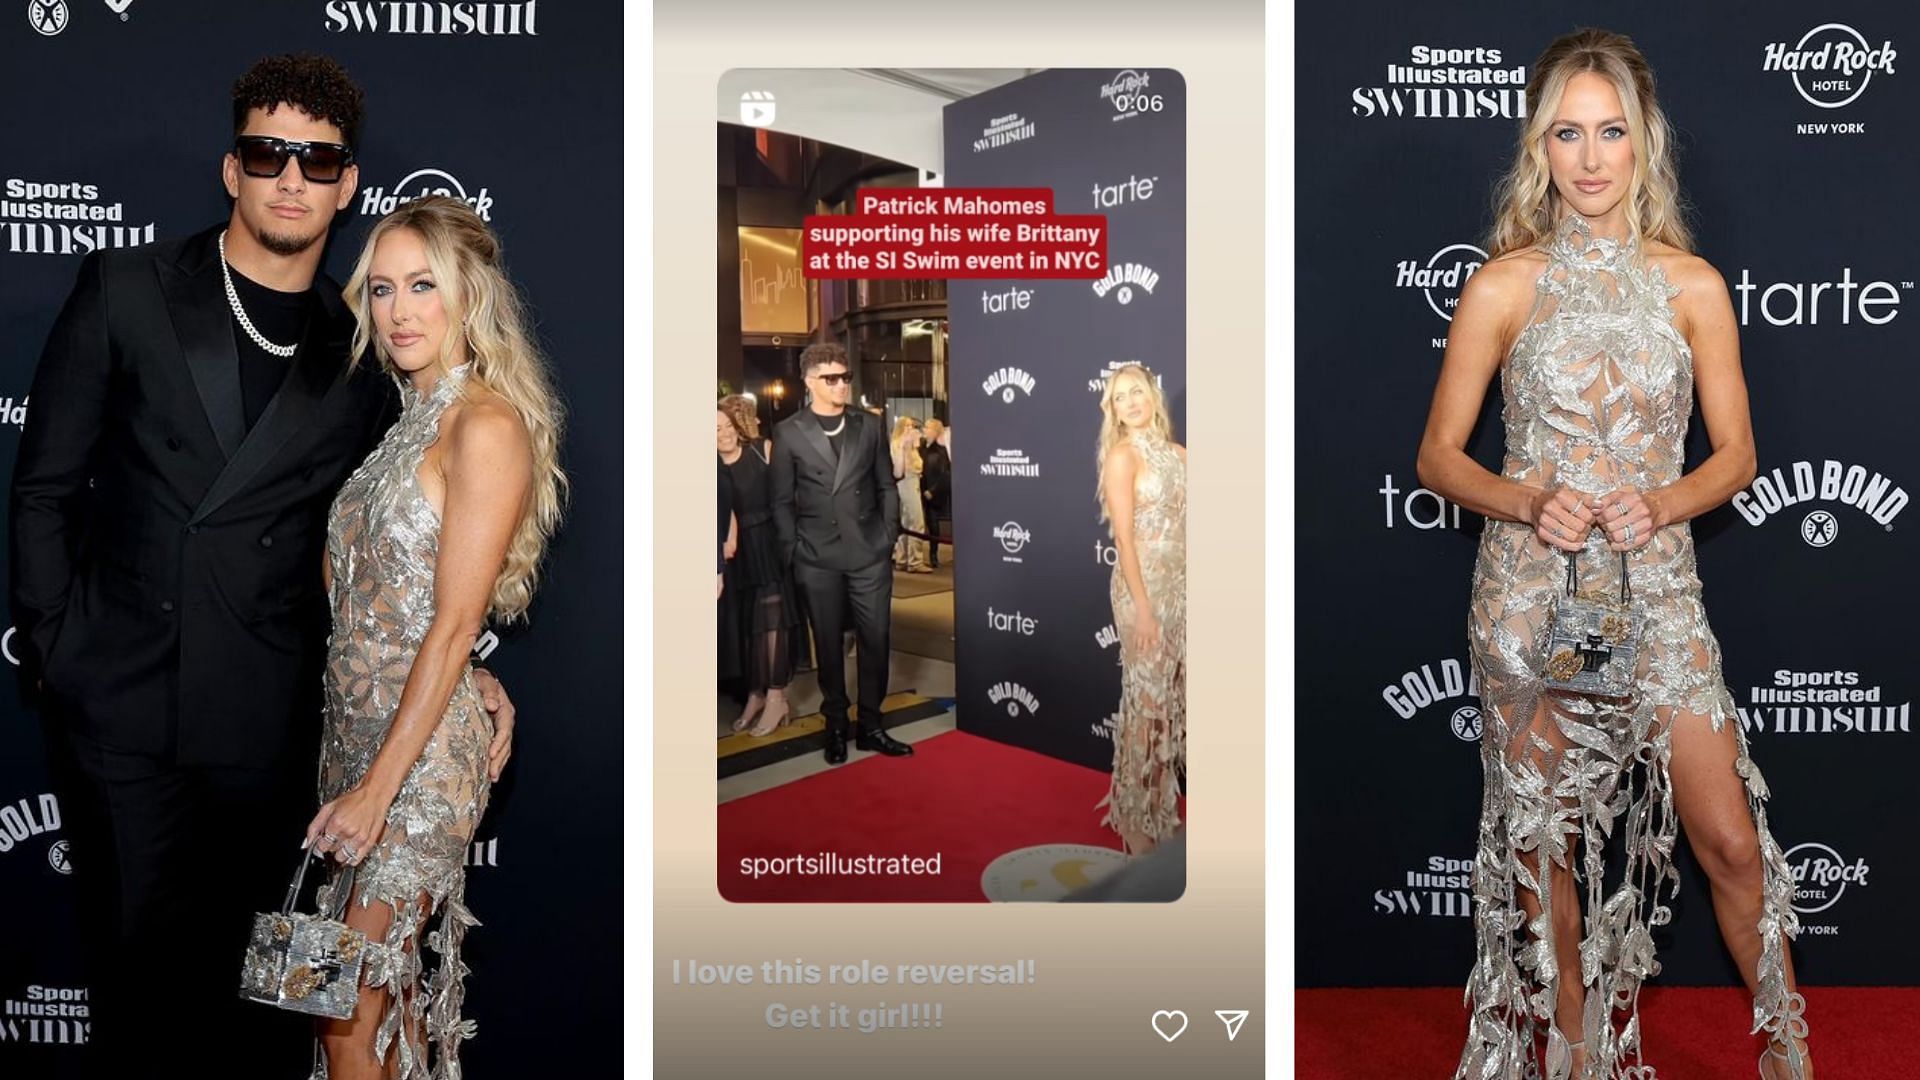 Patrick Mahomes turns cheerleader as wife Brittany steps into spotlight for SI Swimsuit